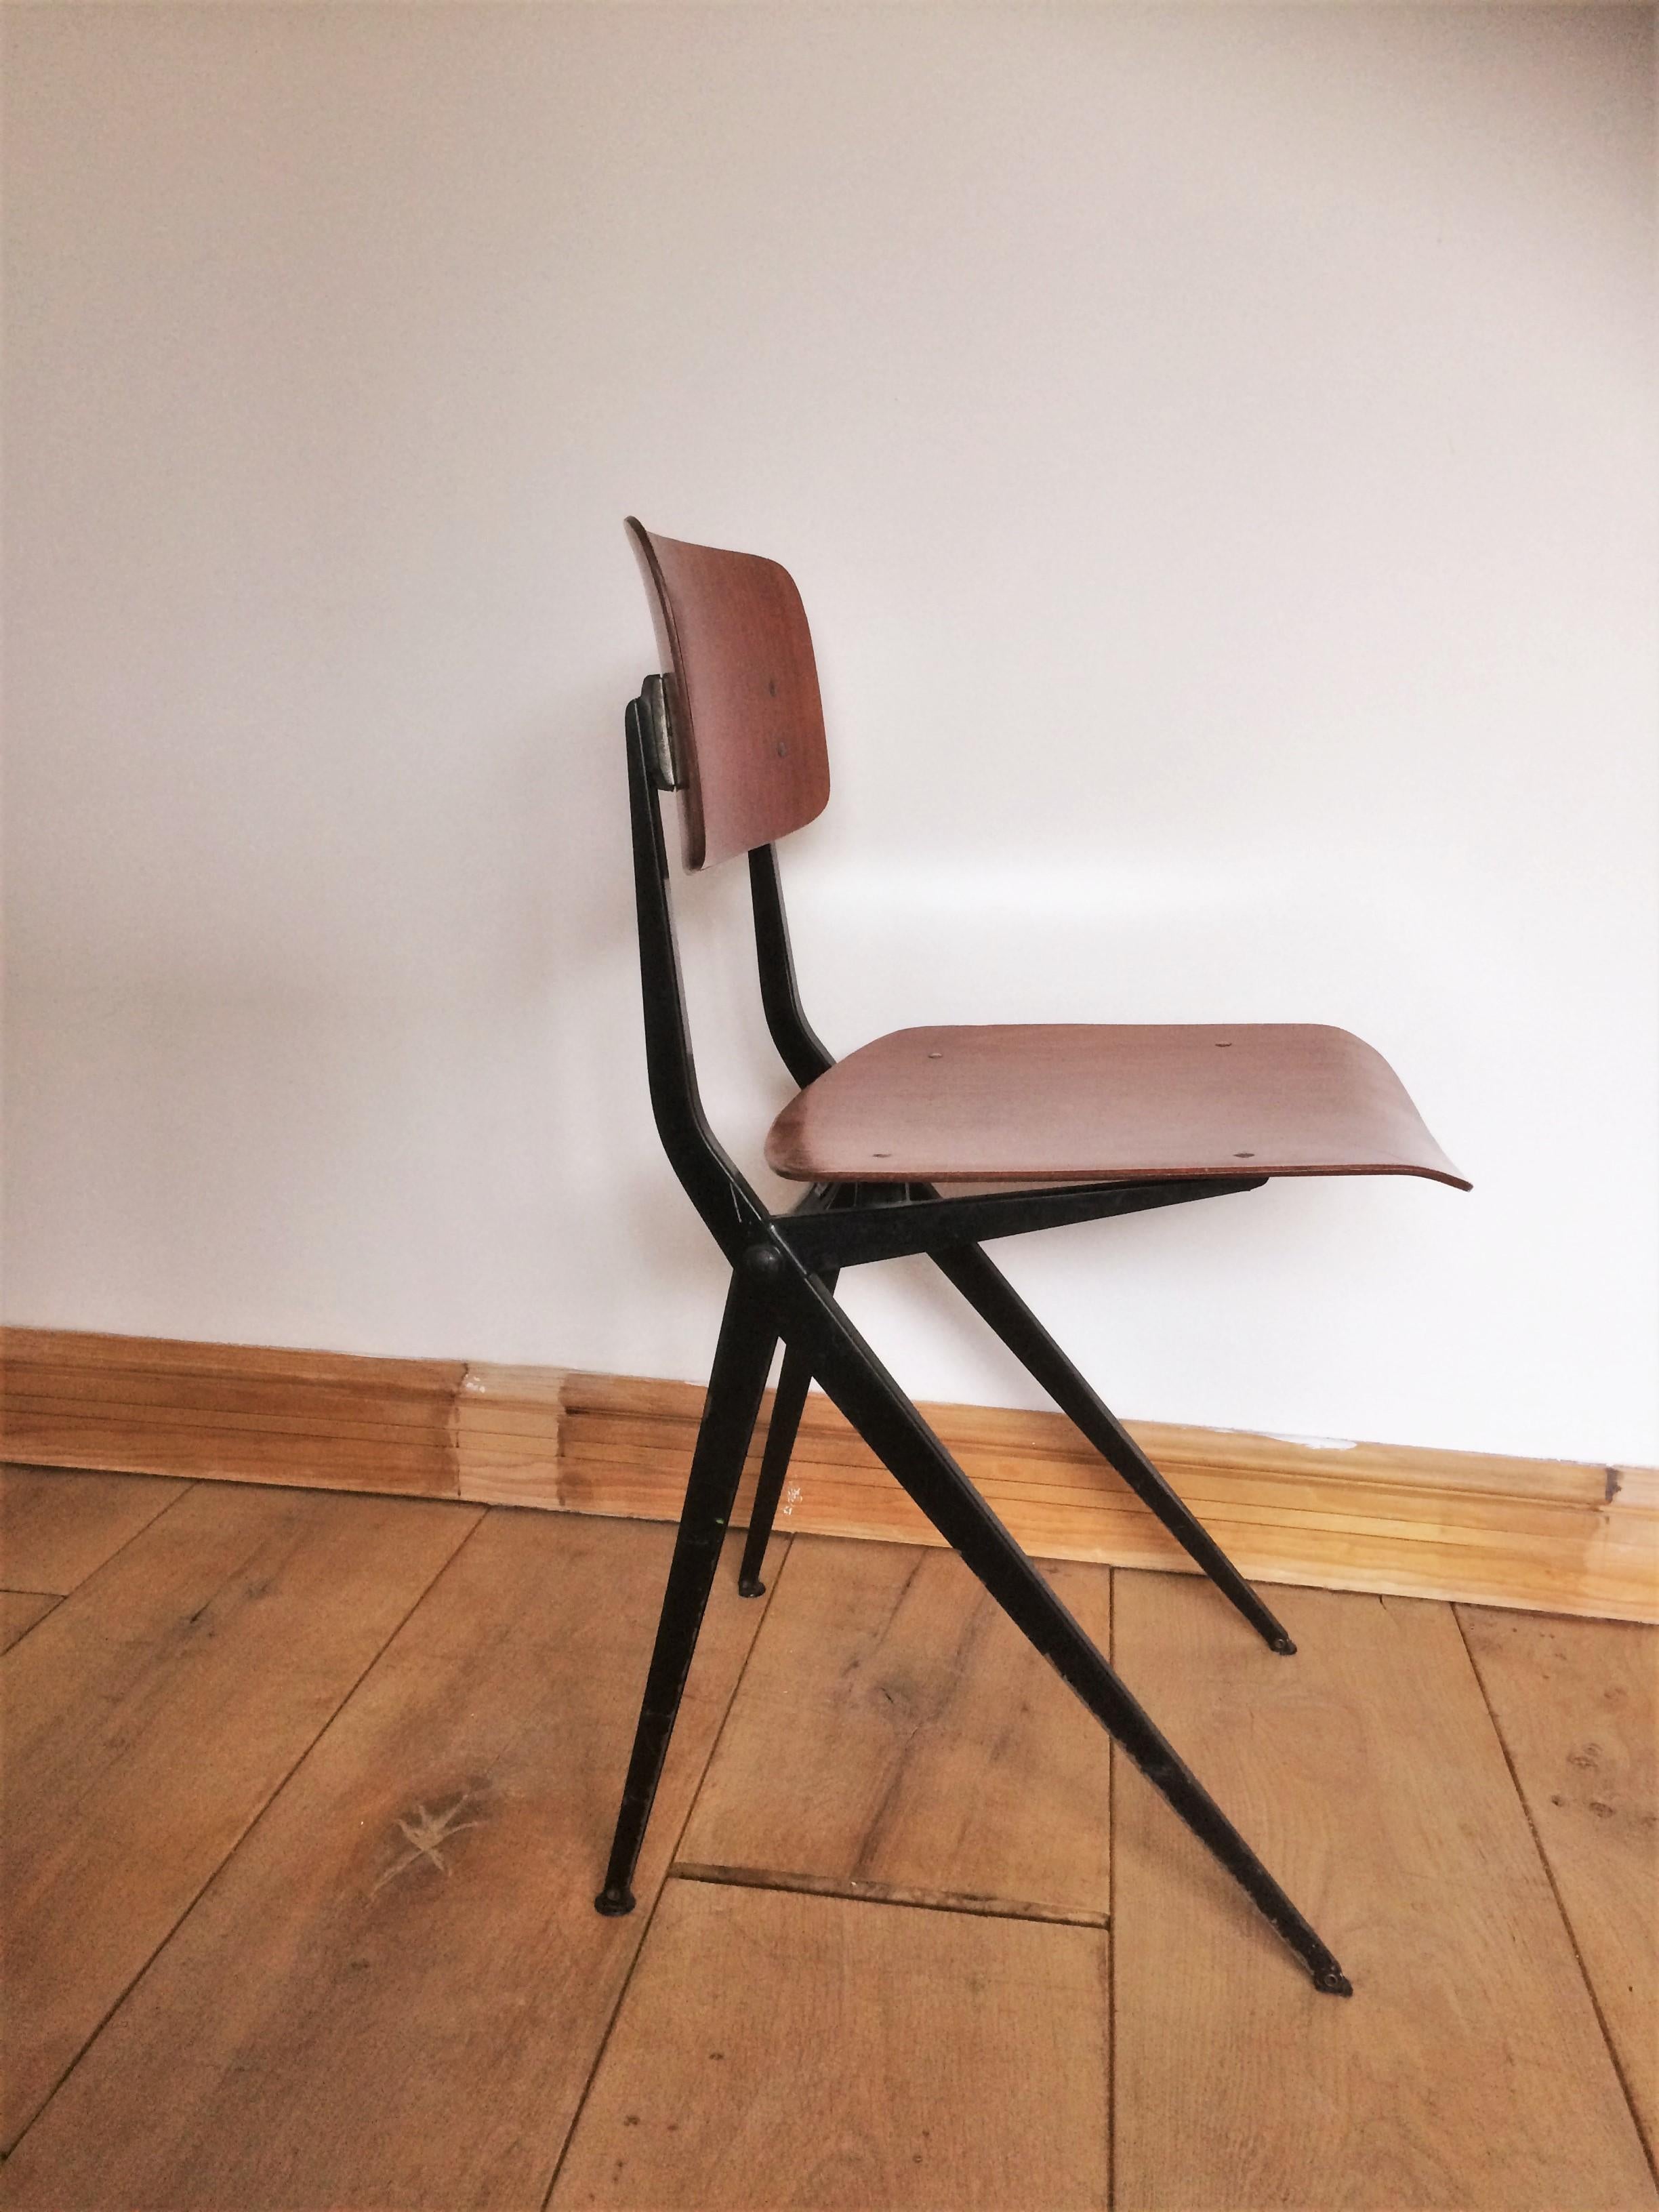 This set of 4 Industrial chairs manufactured designed by Ynske Kooistra for Marko in Holland during the 1960s features a black metal frame with seats and backrests in pagwood. This design is reminiscent of Jean Prouve, Friso Kramer and Rietveld's